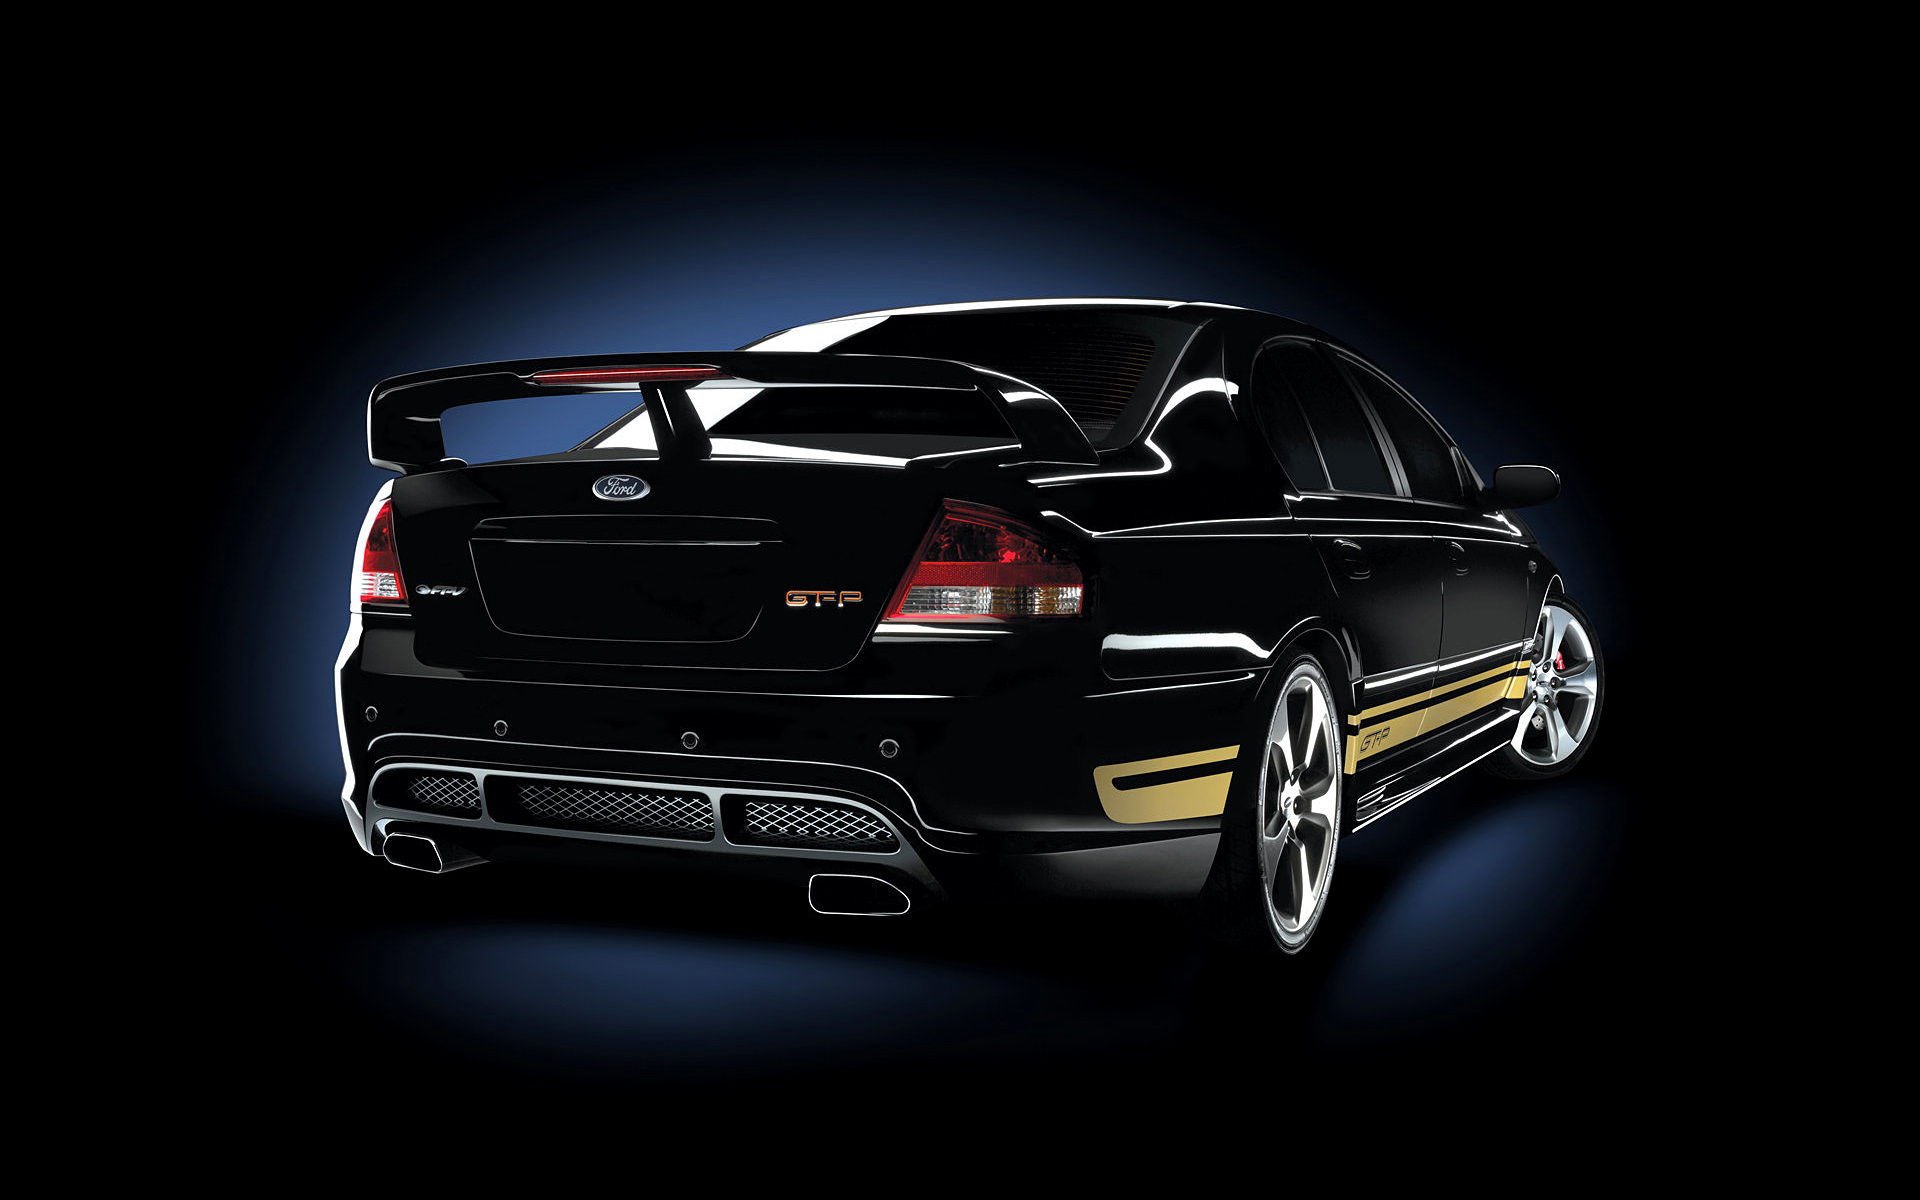  2006 Ford FPV BF MkII Series Wallpaper.